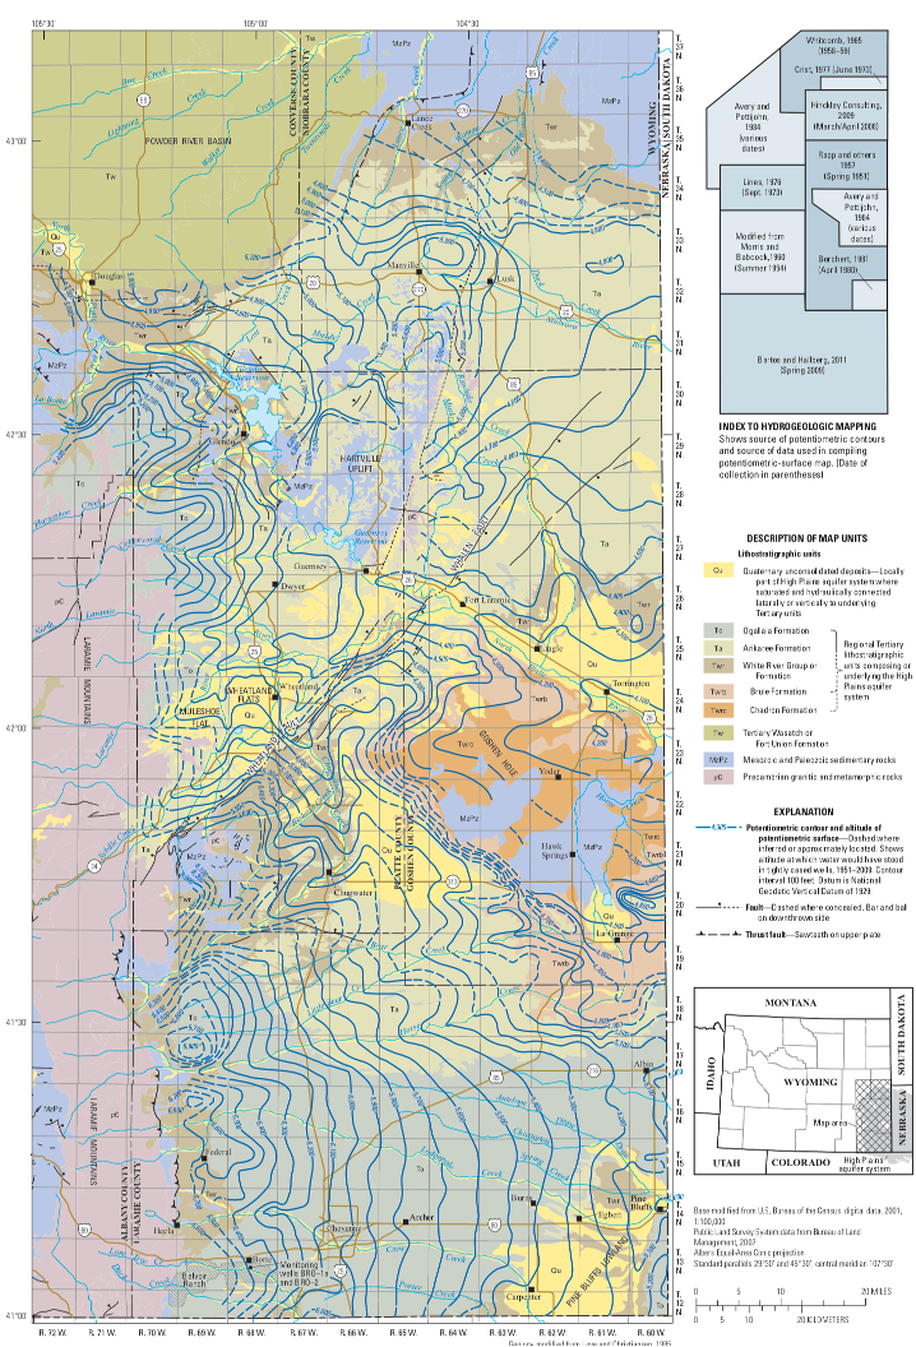 Wyoming High Plains geology map and potentiometric surface map of the High Plains aquifer system, southeast Wyoming